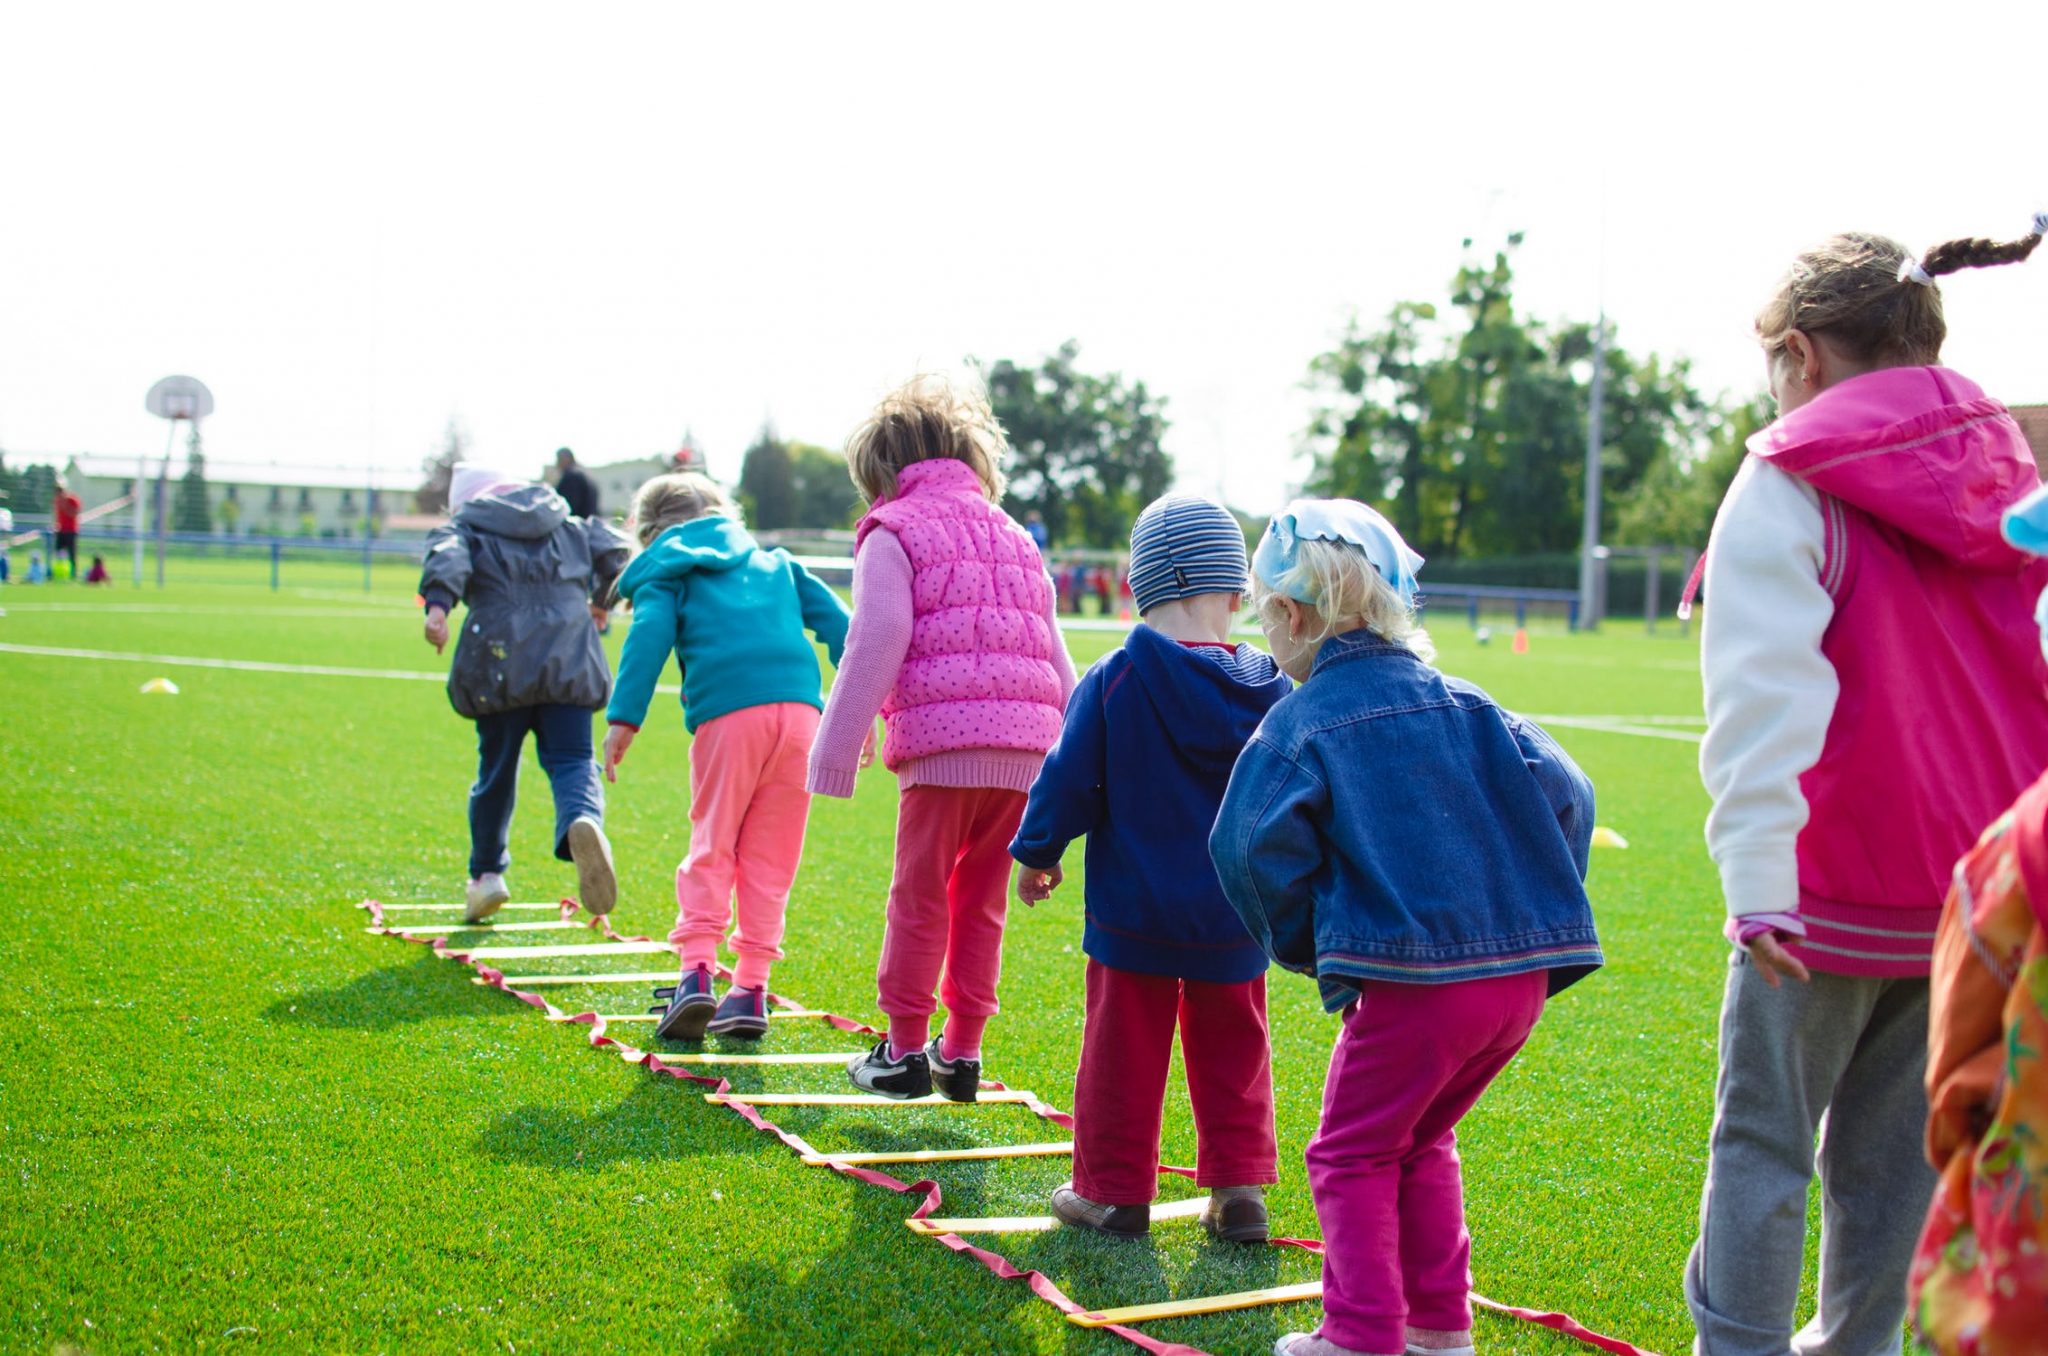 preschoolers-physical-activity-is-linked-to-cognitive-development